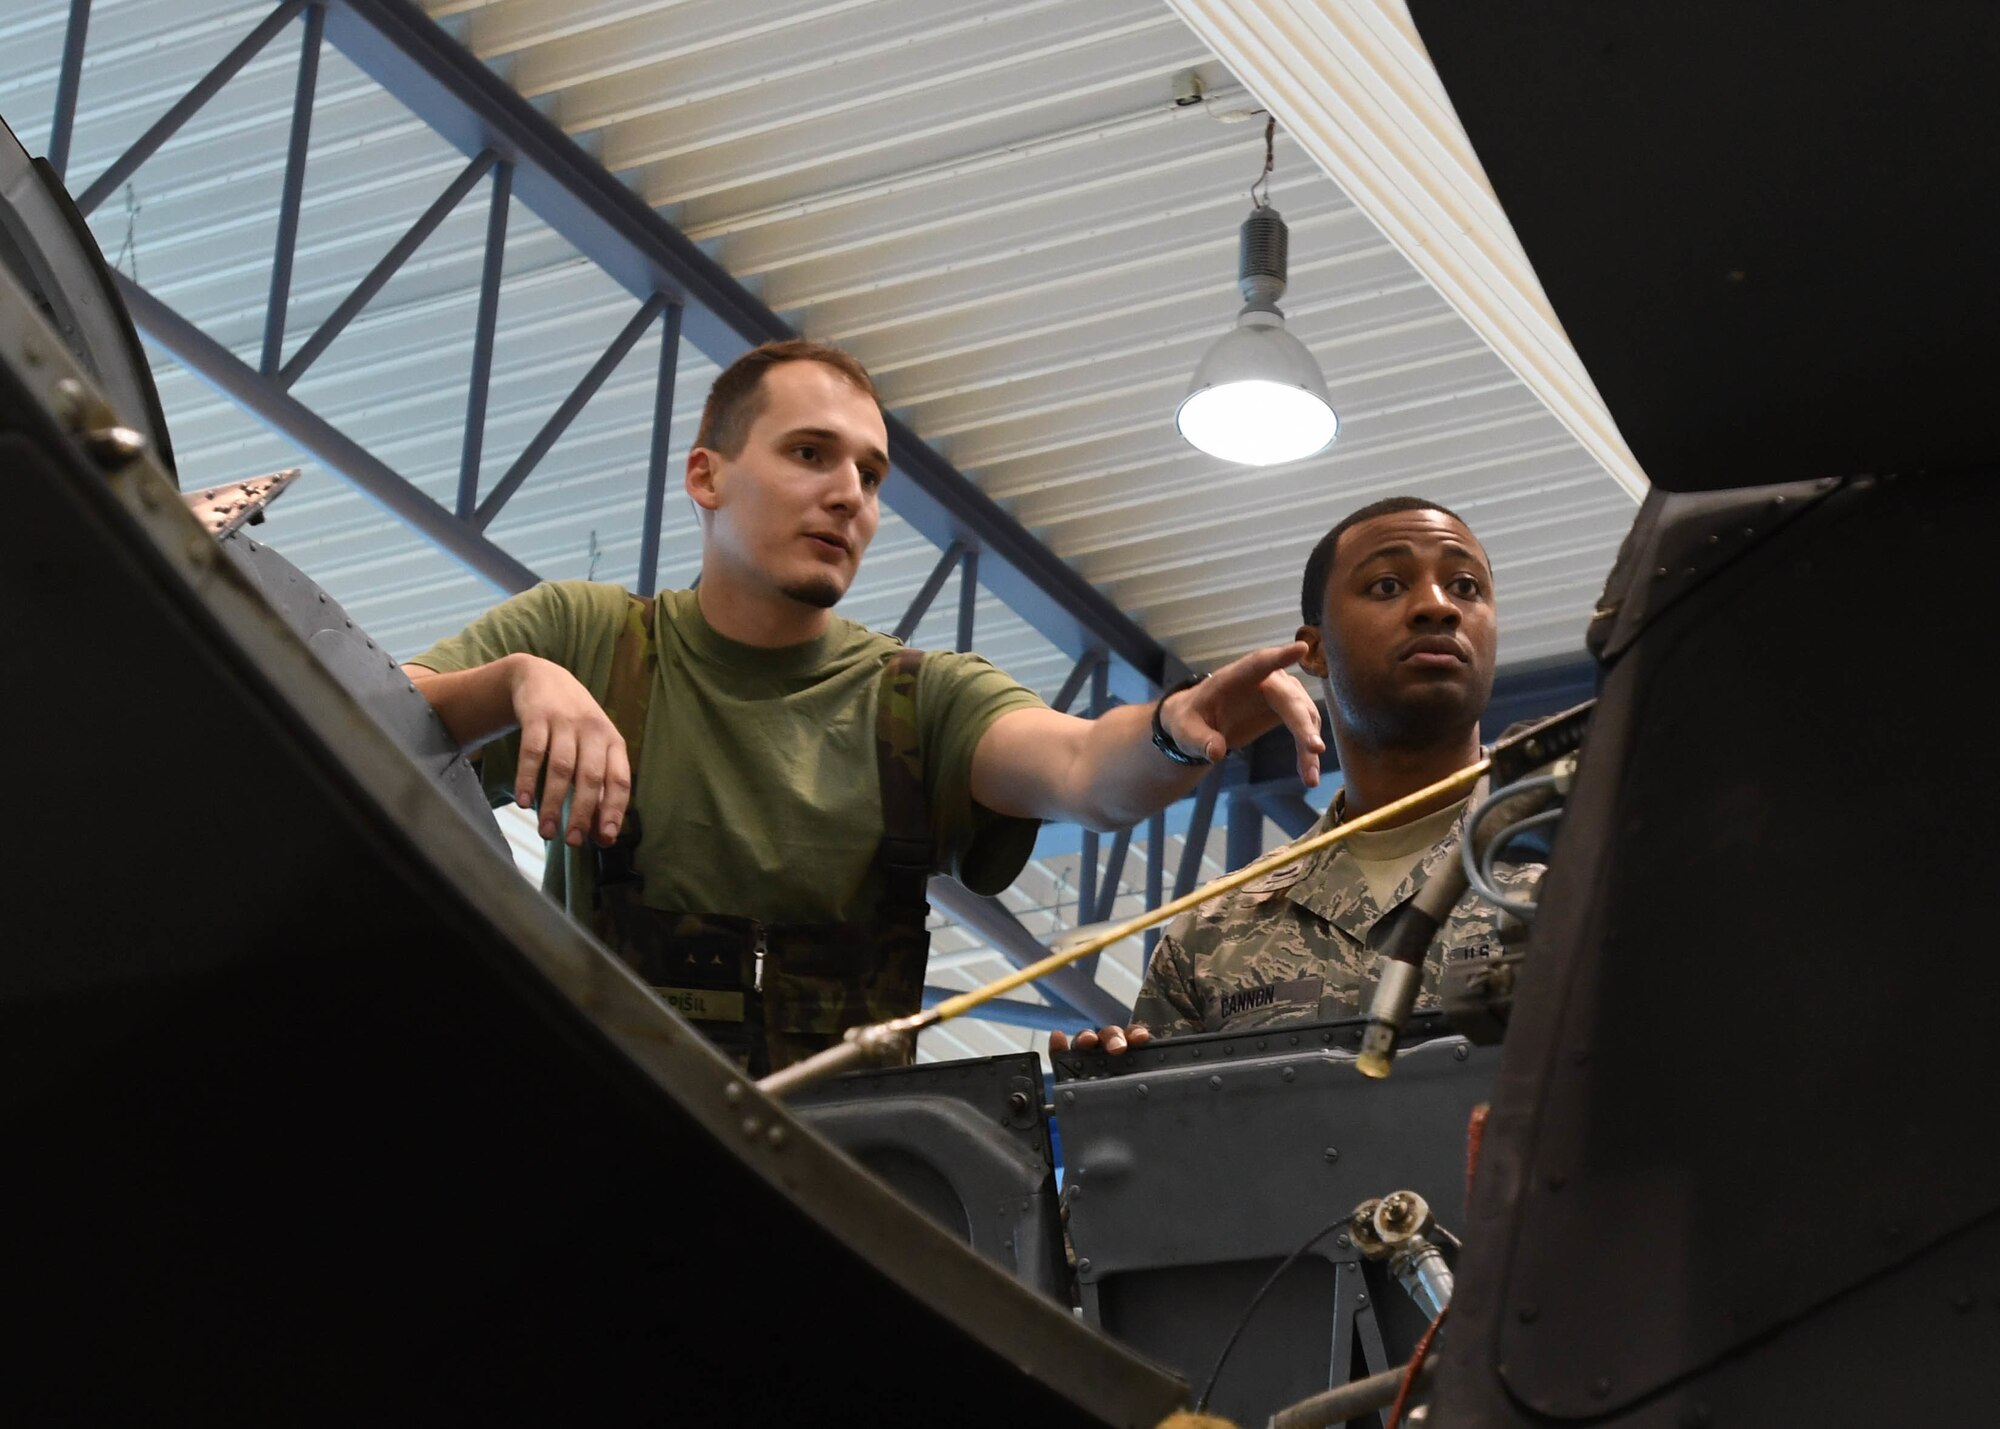 U.S. Air Force 1st Lt. Tyson Cannon, maintenance operations officer with the 149th Fighter Wing, Texas Air National Guard, and Czech Air Force 1st Lt. Pavel Popspisil, chief of electric and special equipment group, examines the main gear box of the Mi-24 Hind Attack Helicopter March 22, 2017 at 22nd Air Base, Namest Nab Oslavou, Czech Republic. Popspisil explained how the gear box and engine were configured and removed. (Air National Guard photo by Senior Airman De’Jon Williams)